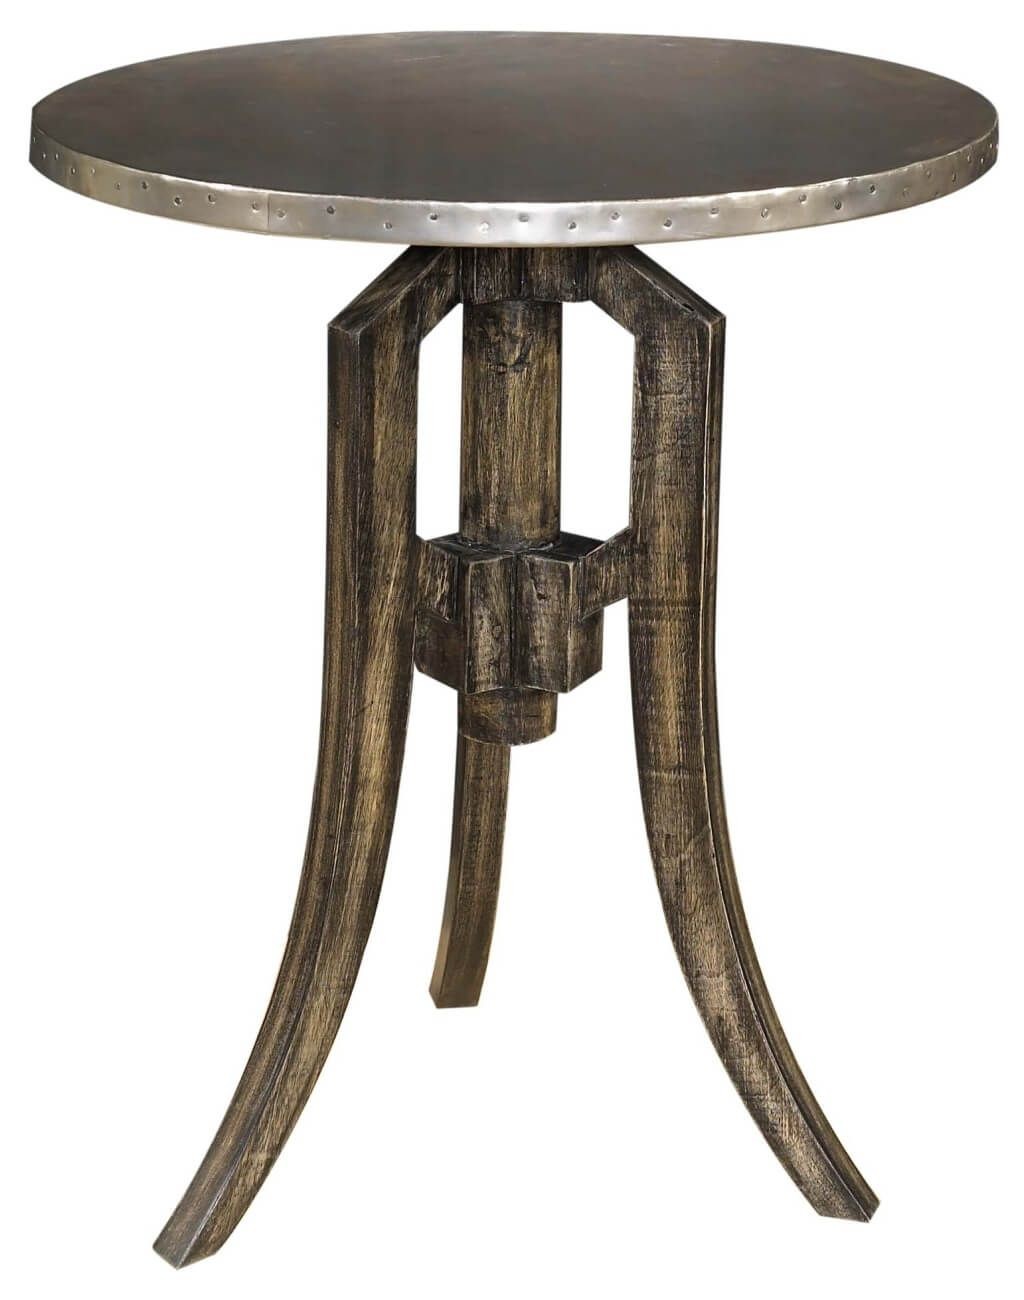 wooden vintage base kavanaugh metal gold silver table pedestal round target reclaimed small wood drum outdoor kastner retro black side yellow red legs accent full size patio